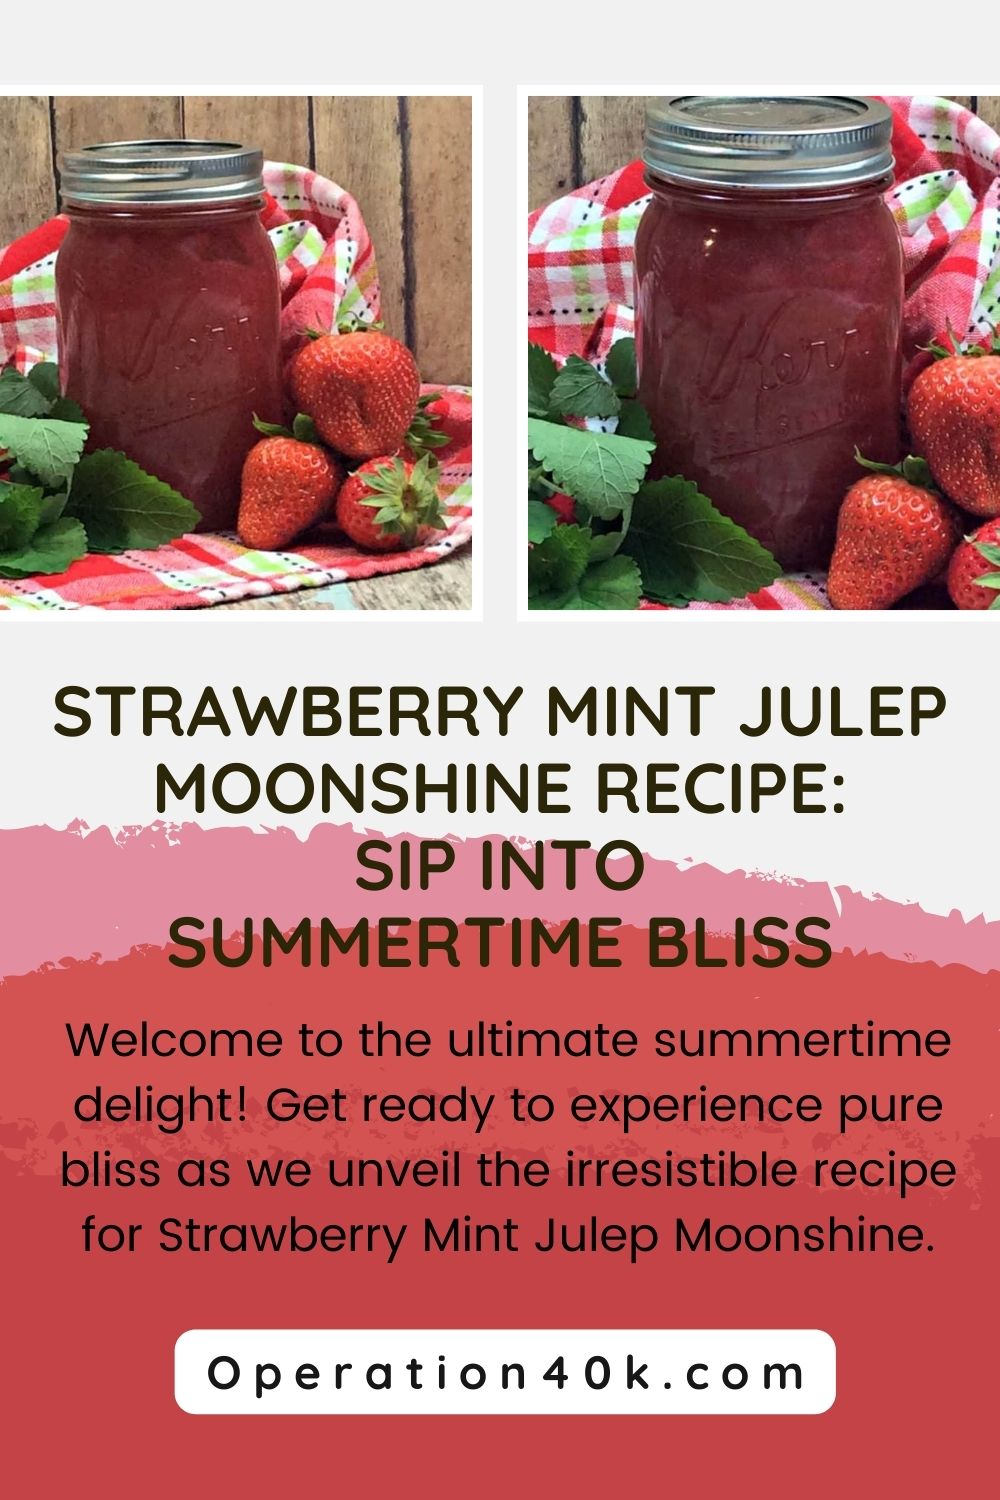 Strawberry Mint Julep Moonshine Recipe: Sip into Summertime Bliss